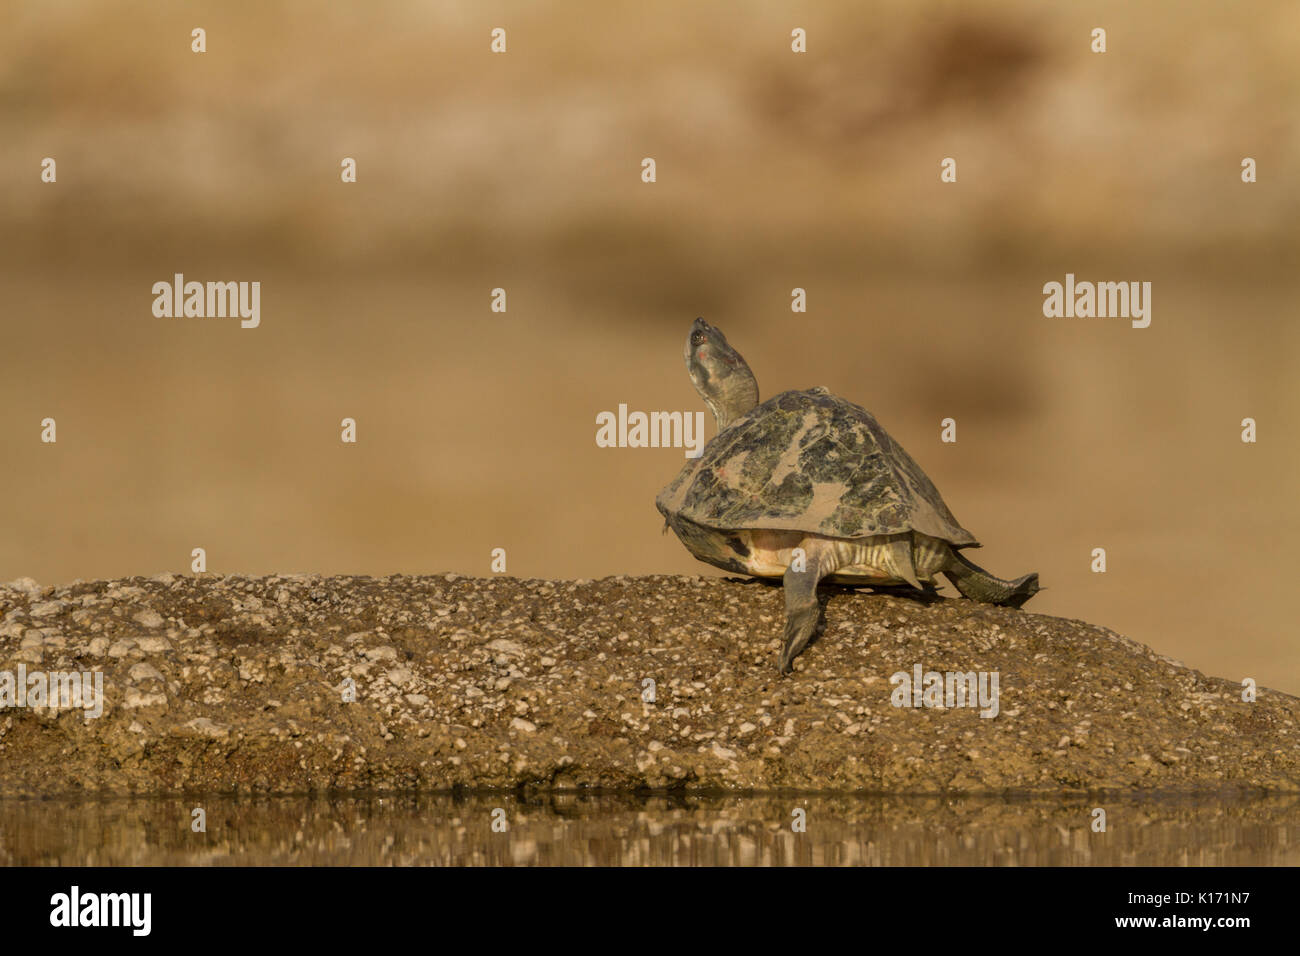 Indian Red-Crowned Roof Turtle (Batagur kachuga) in the Chambal River near Dholpur, Rajasthan. Stock Photo